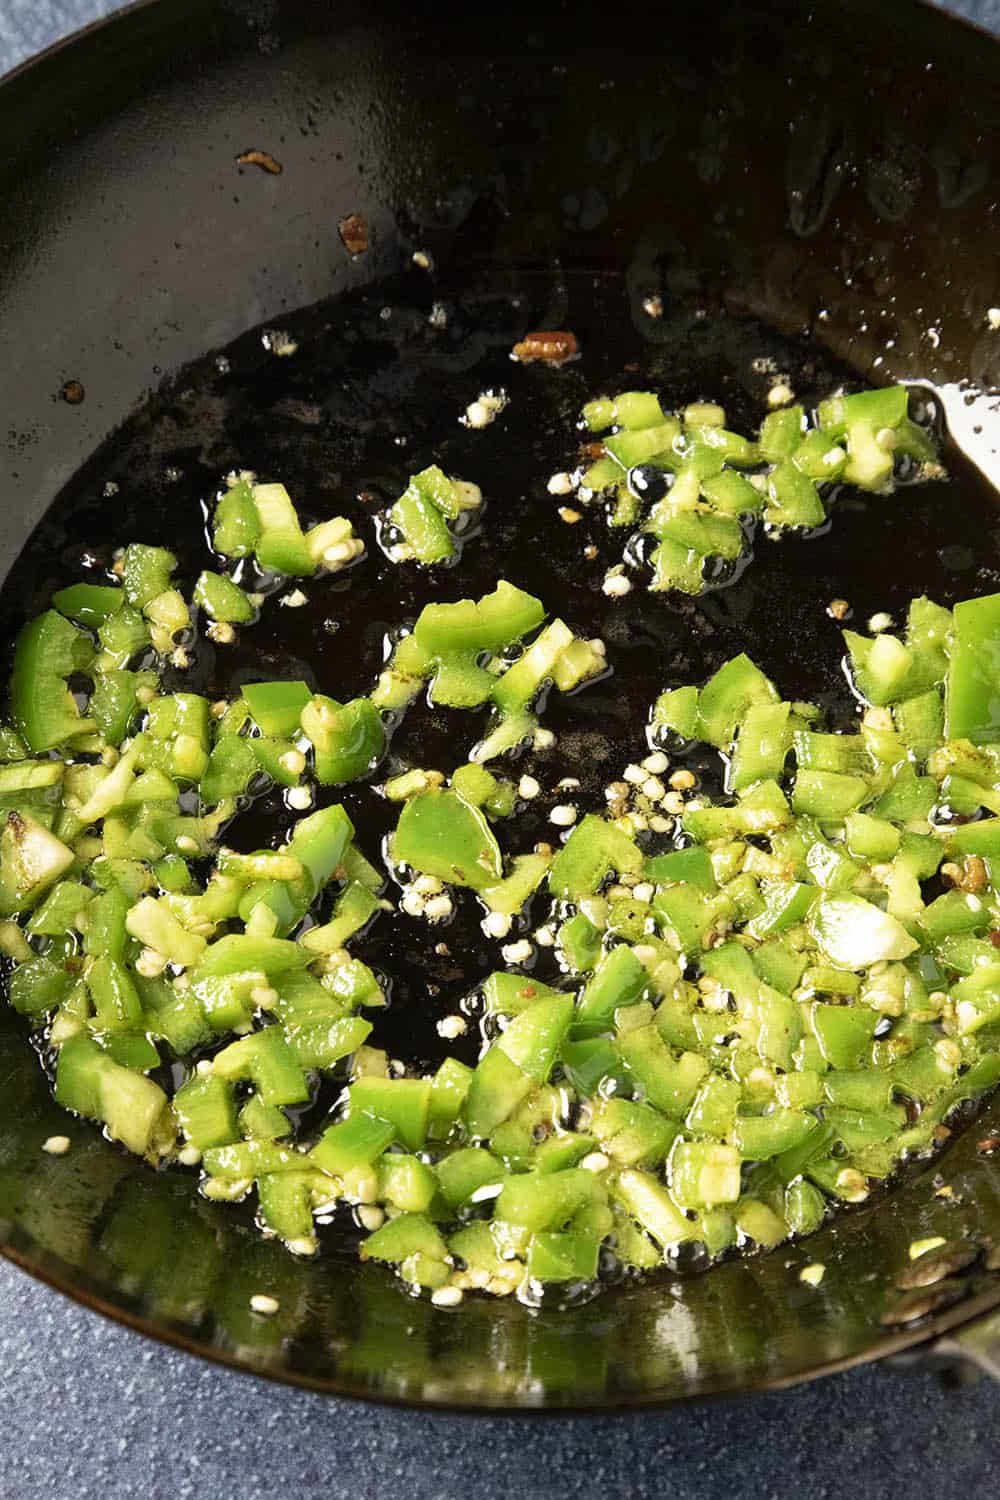 Cooking the jalapeno peppers in a pan